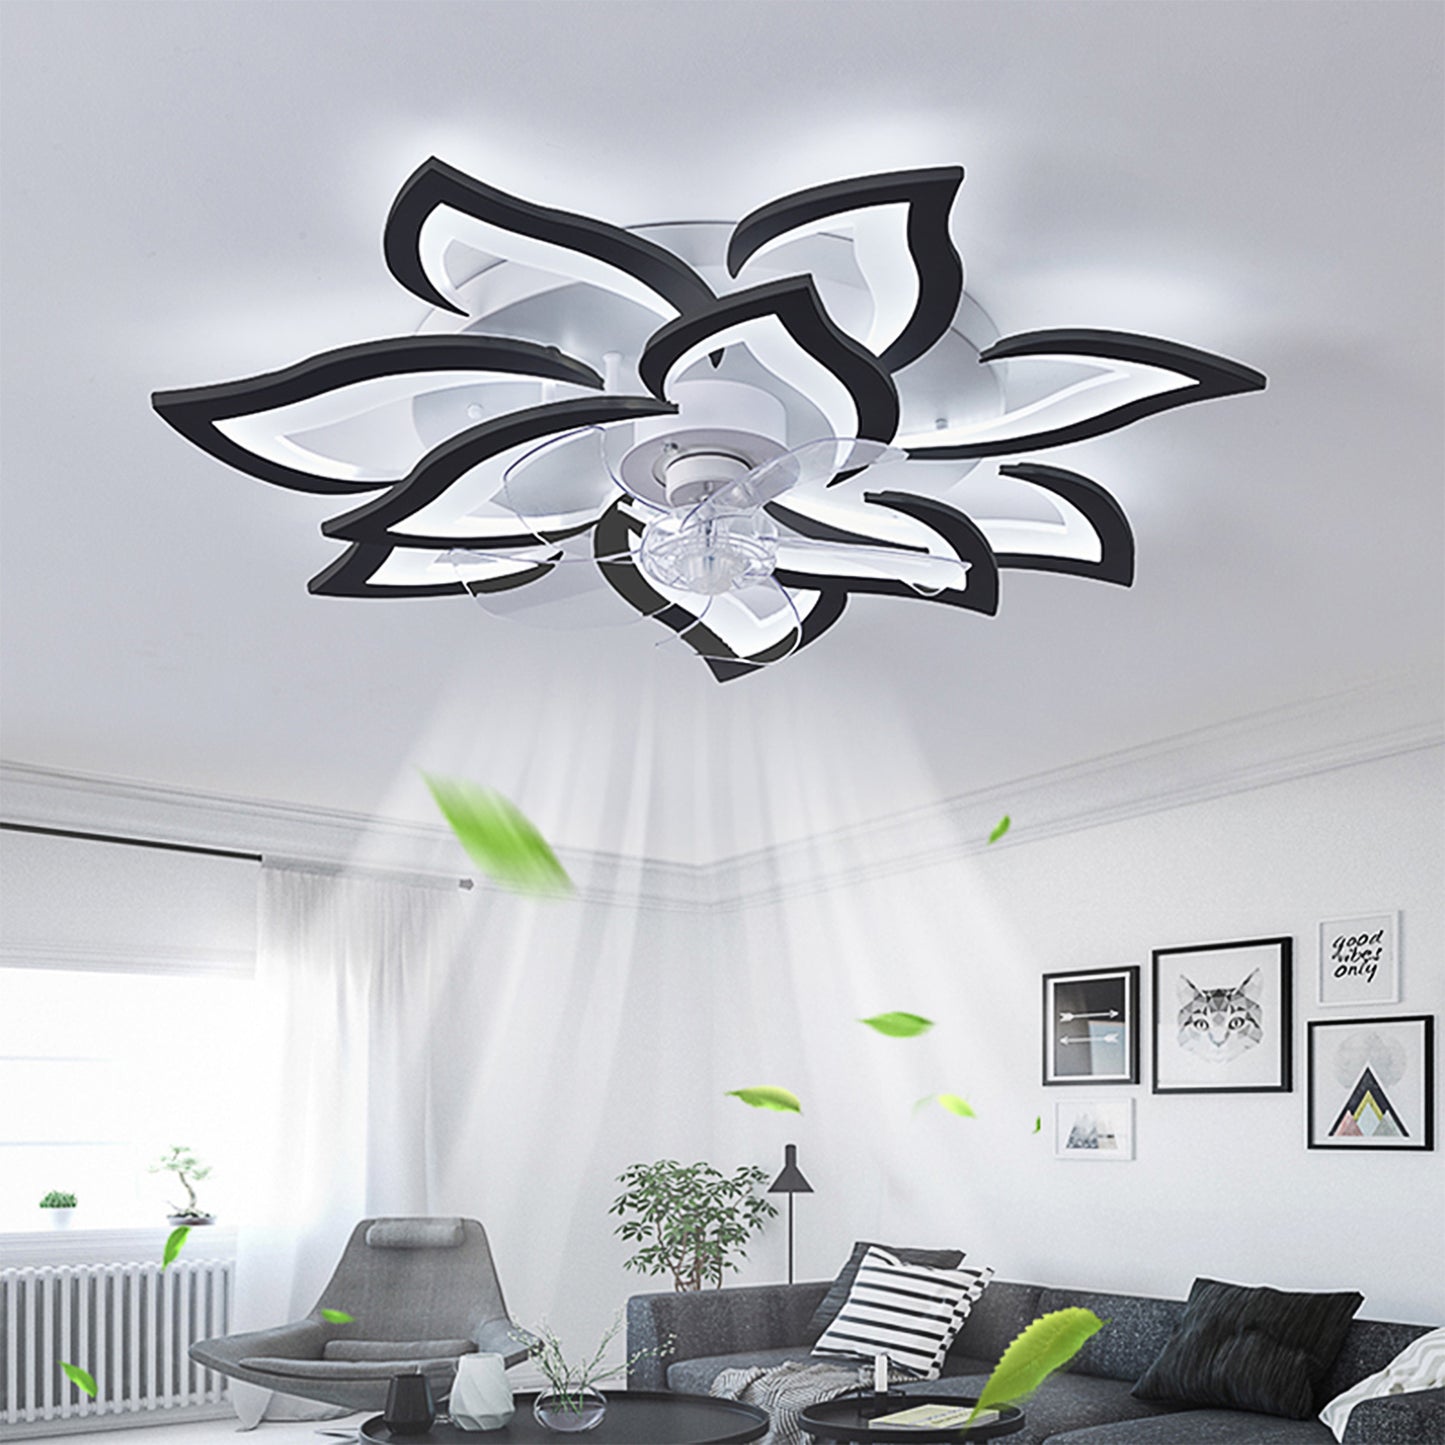 32-inch Black Acrylic Ceiling Fan with Remote Control and Dimmable LED Lights